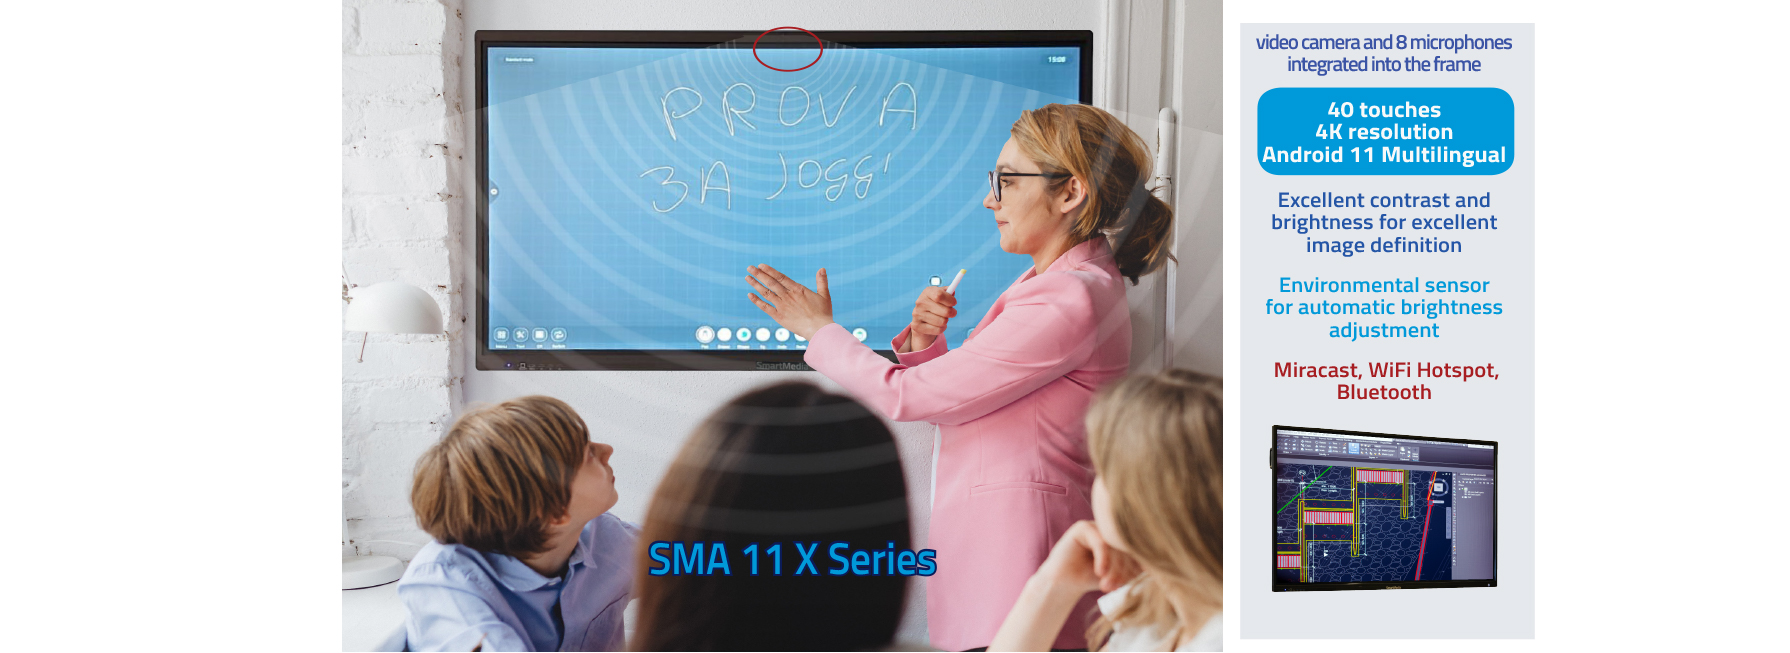 Monitor SMA 11 Serie x - 65”, 75”, 86” 4K touch screen - 65”, 75”, 86” 4K touch screen<strong></strong>